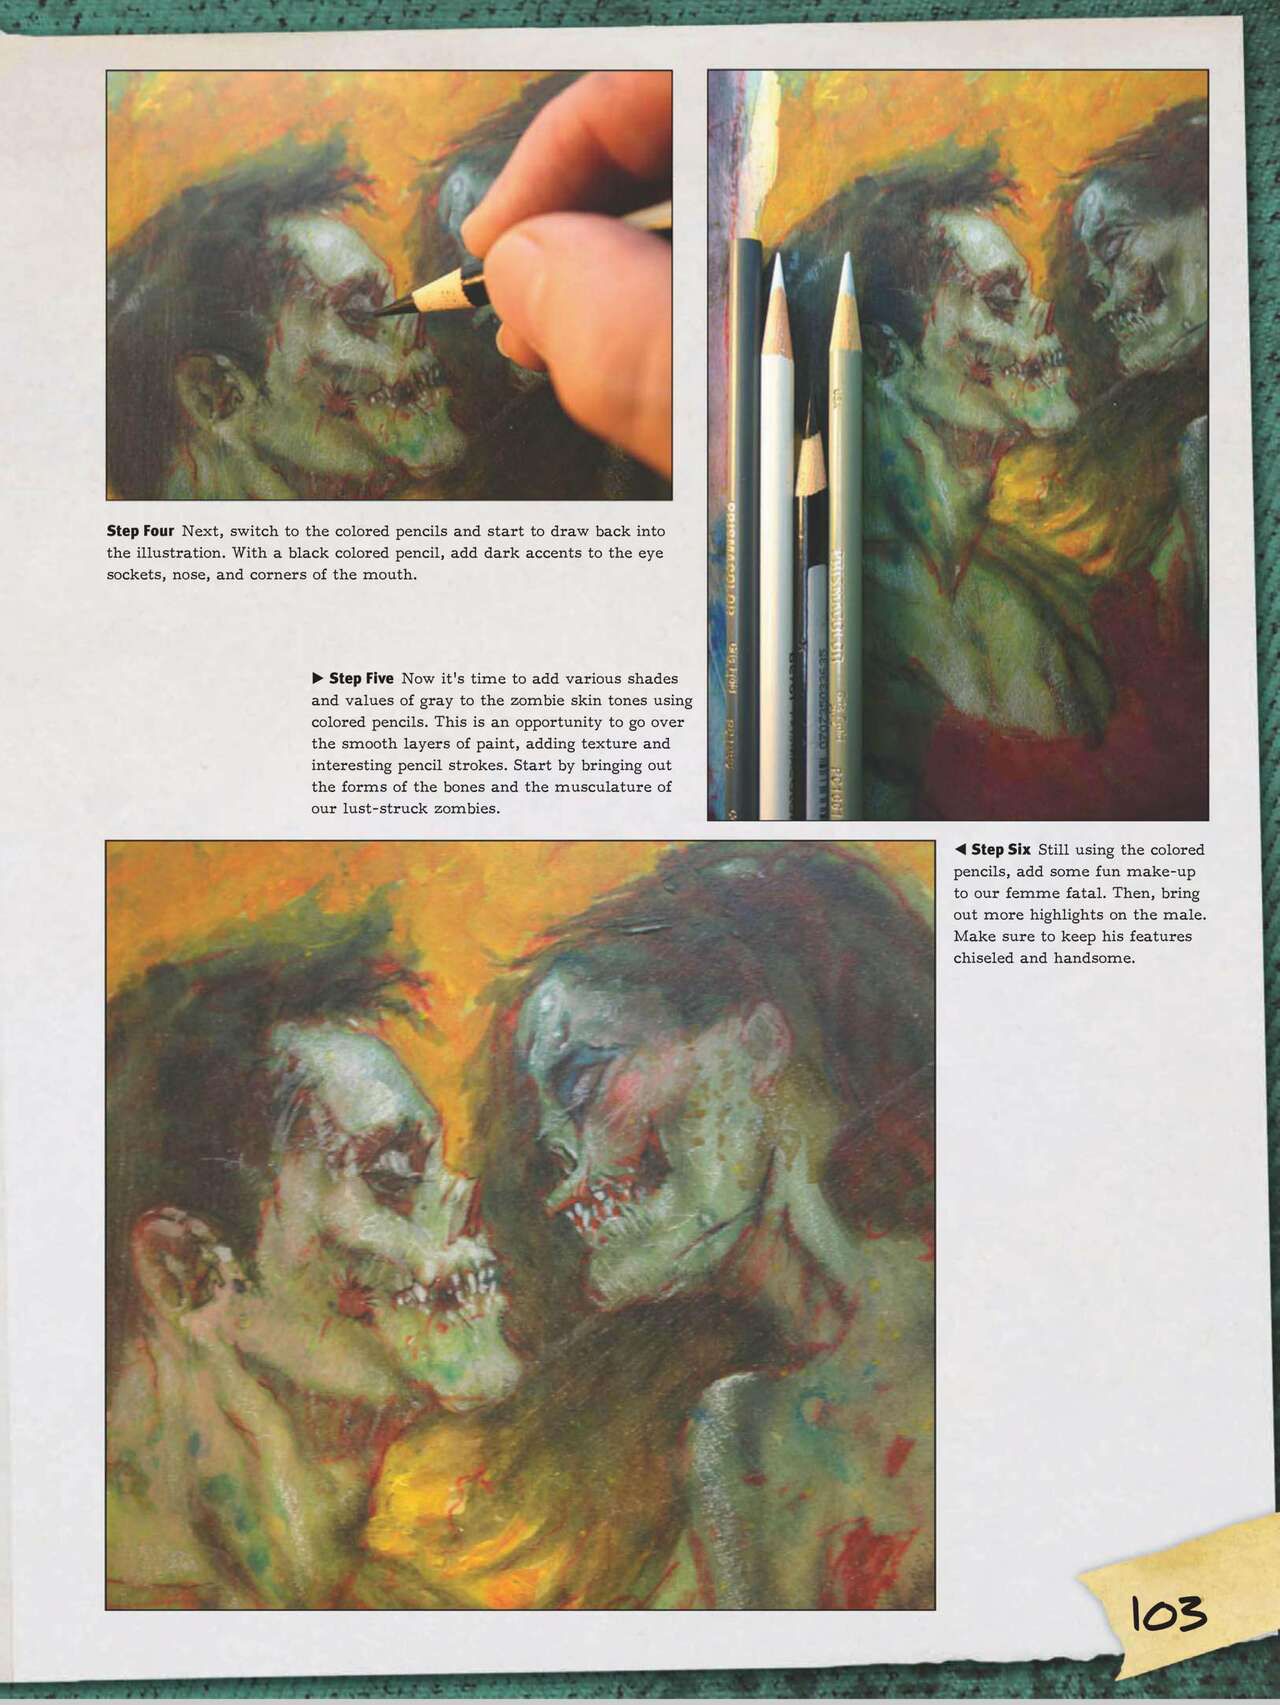 How to Draw Zombies: Discover the secrets to drawing, painting, and illustrating the undead 僵尸描绘集 104